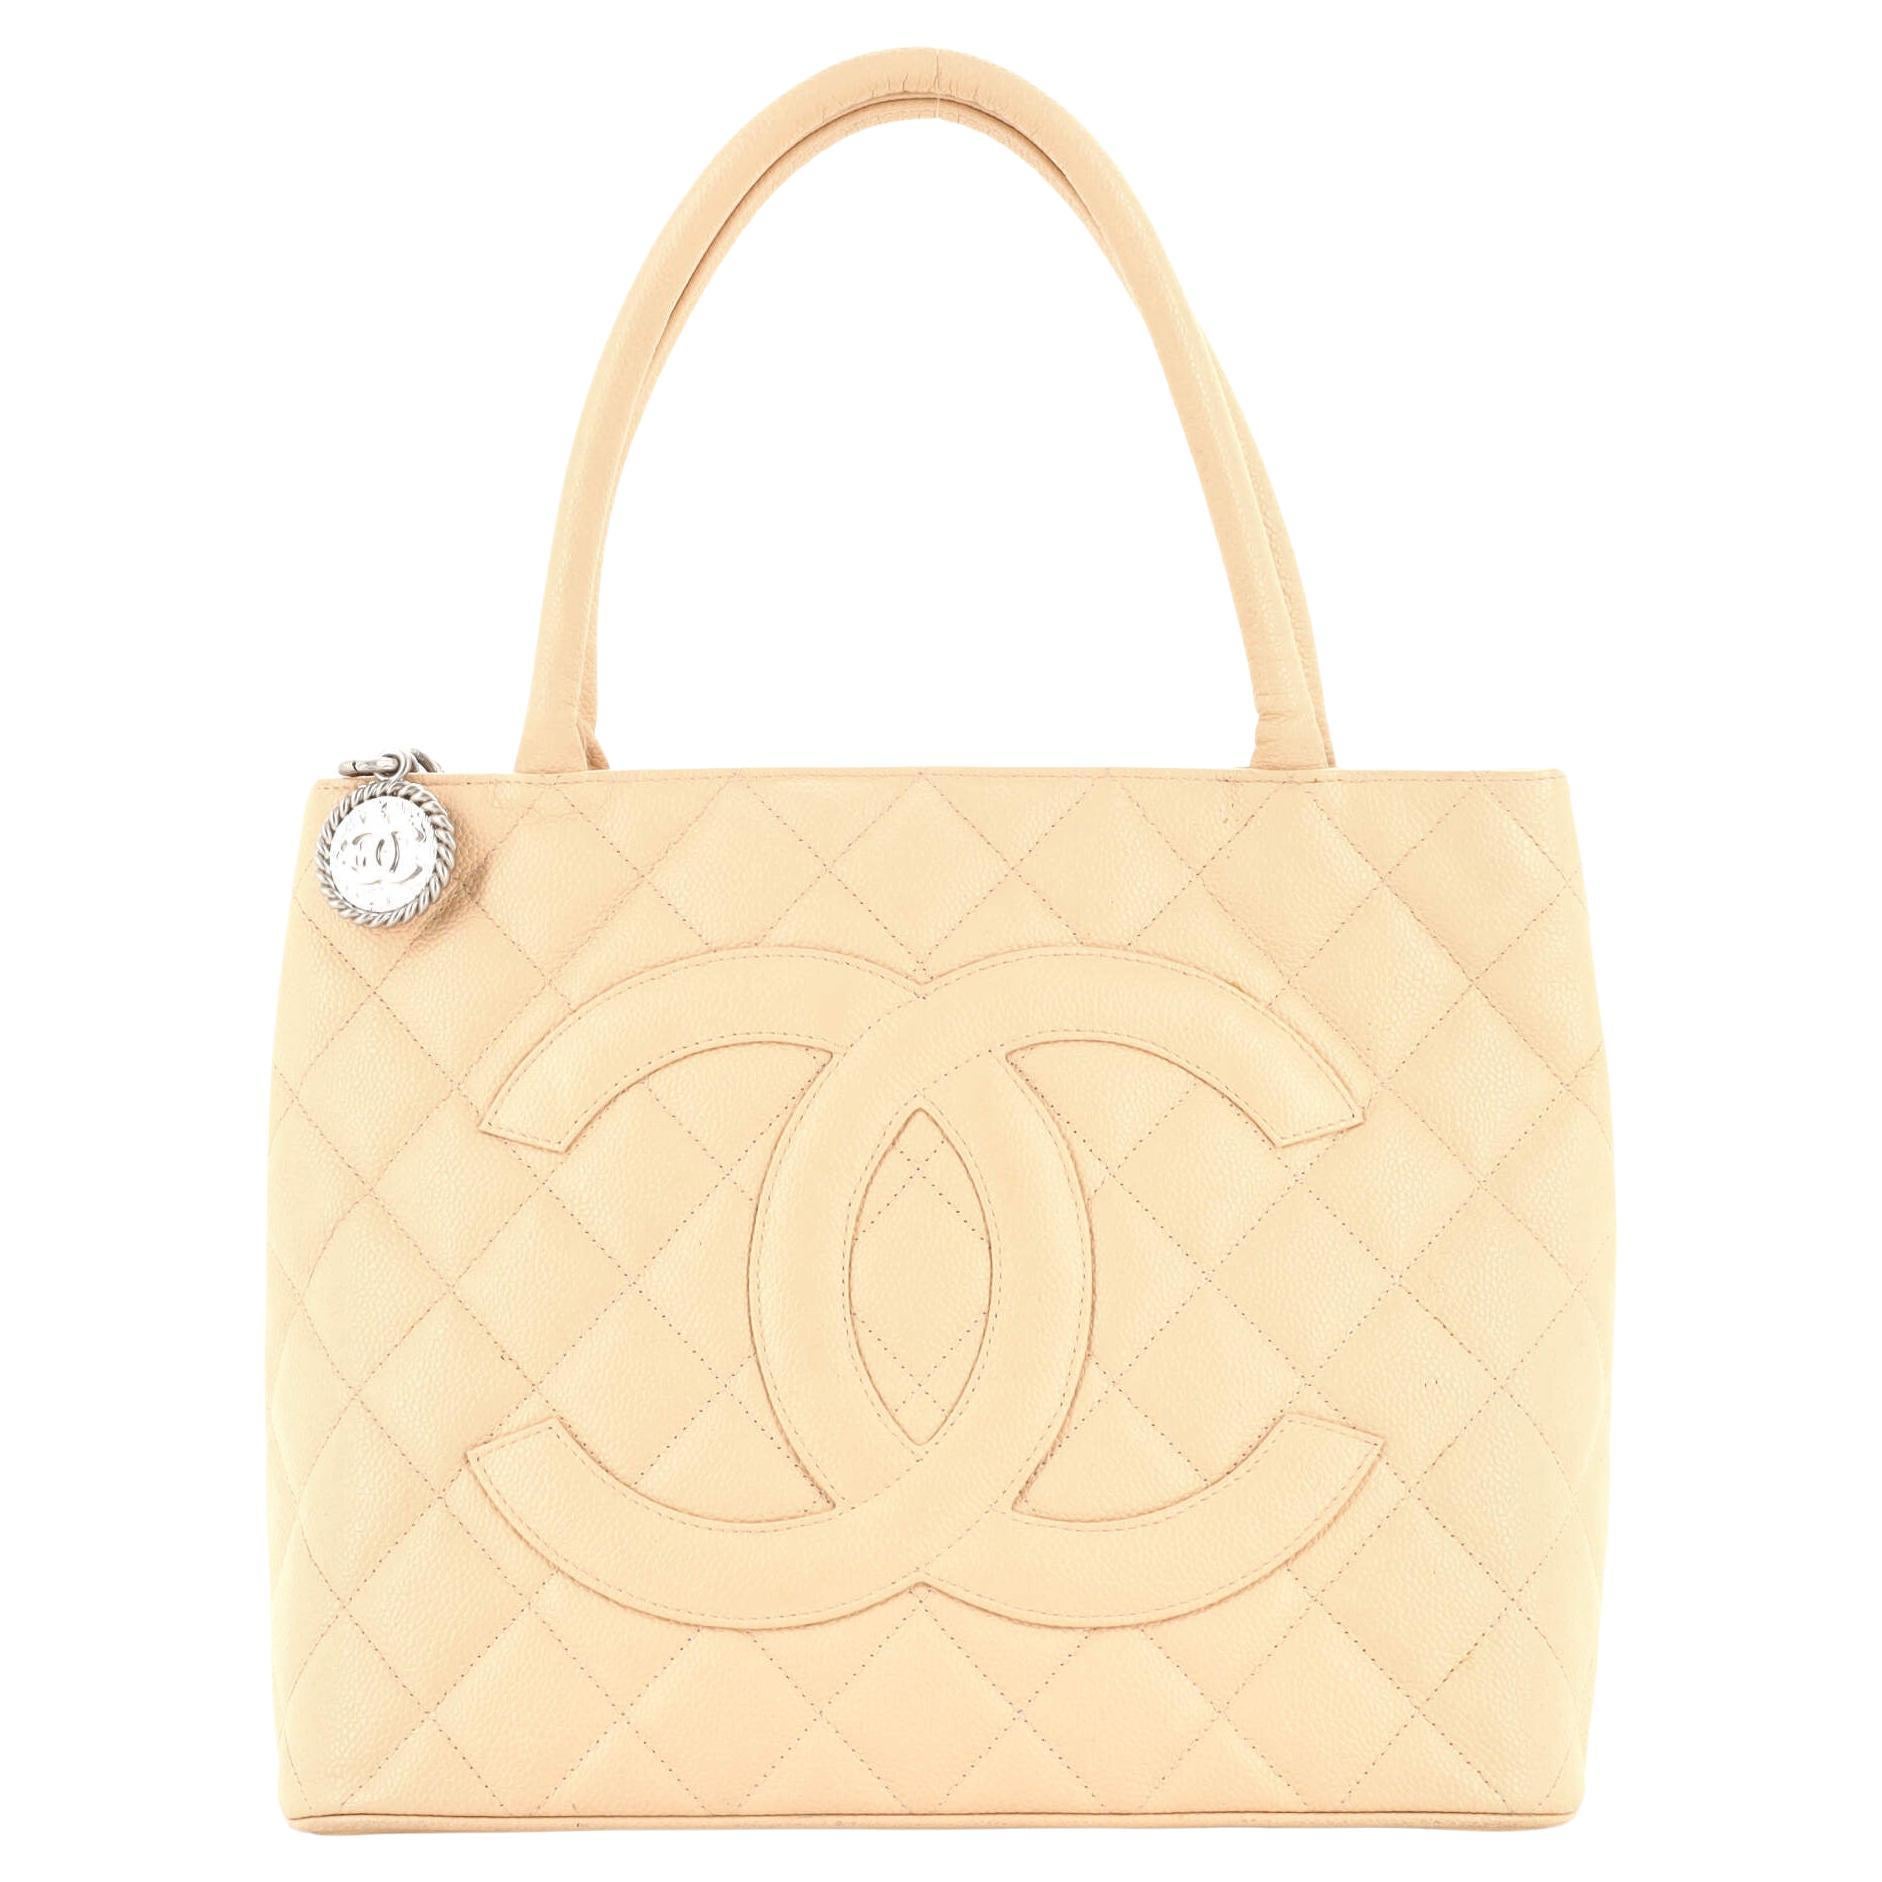 Chanel Medallion Tote: Complete Guide & Review. Still A Beloved